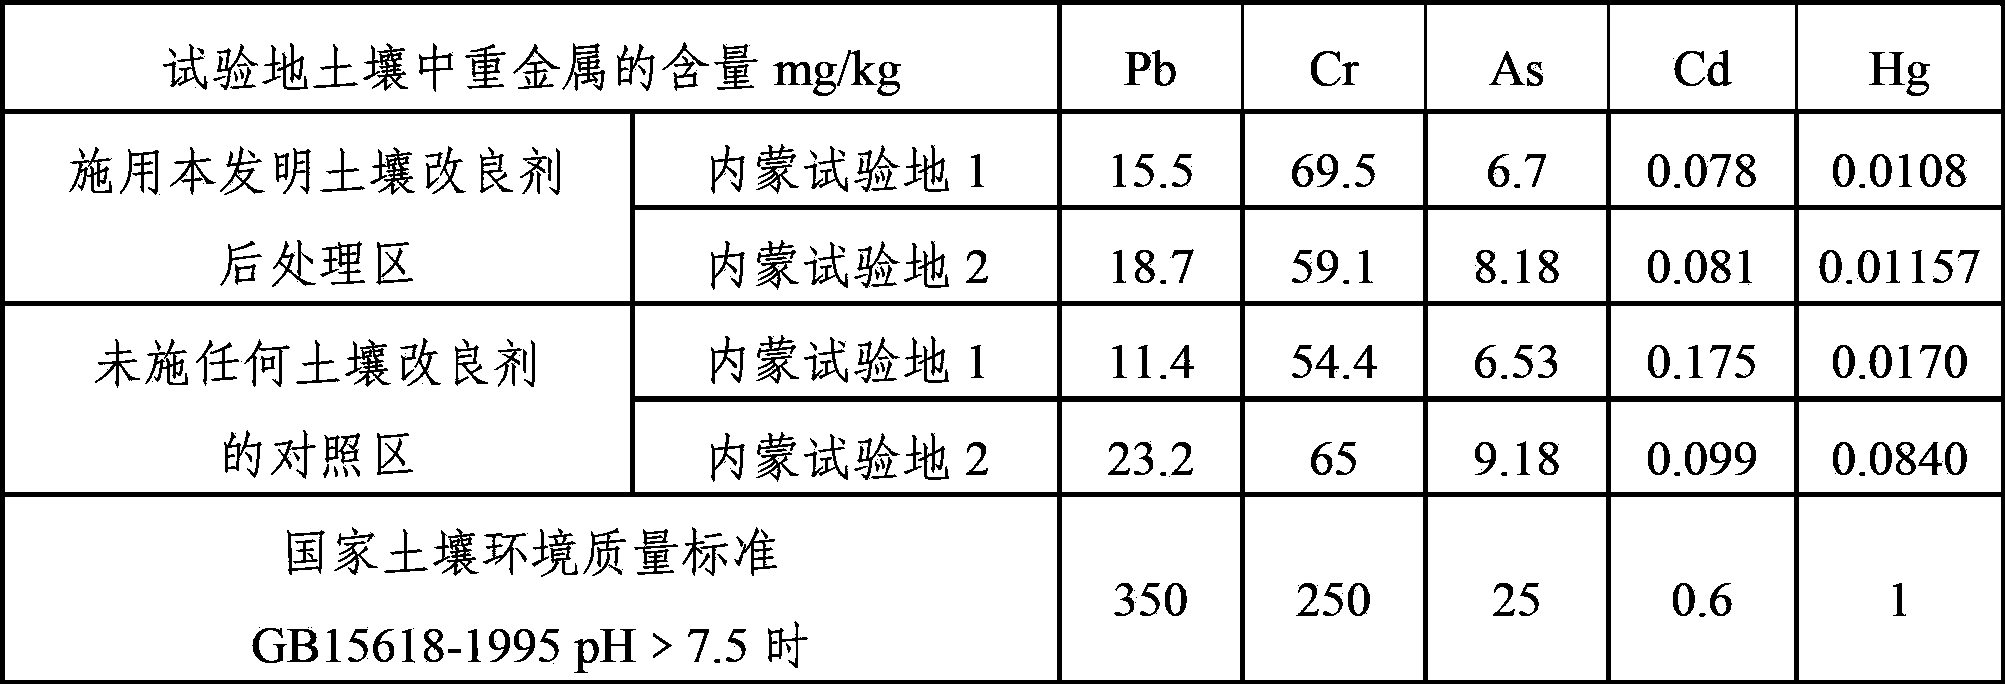 Conditioner for moderately alkaline soil and processing method of conditioner